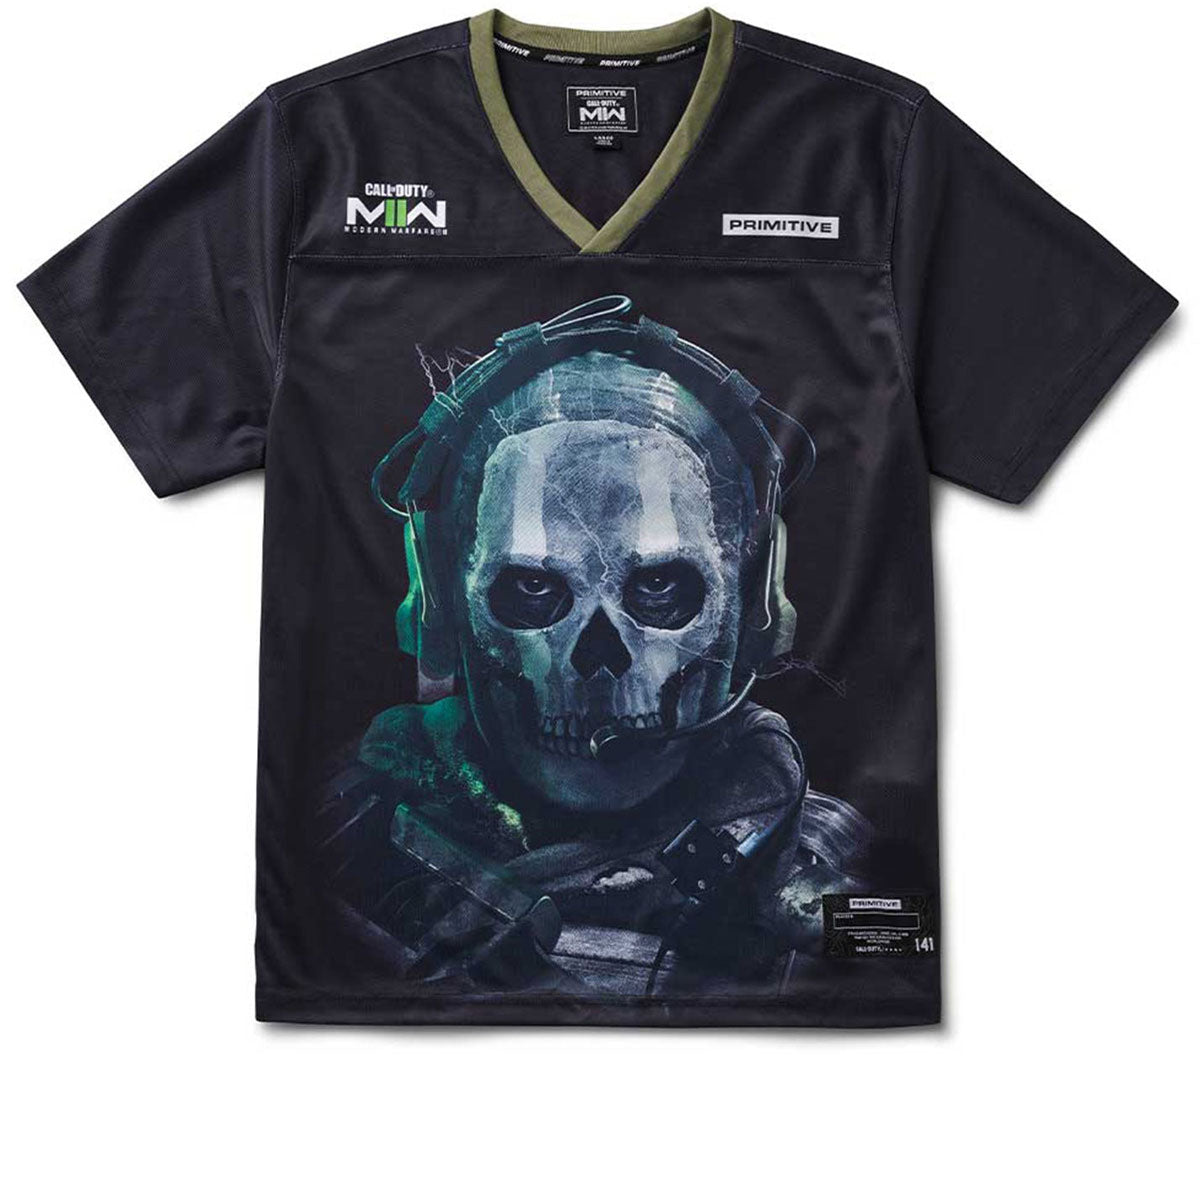 Primitive x Call Of Duty Ghost Jersey - Black image 1